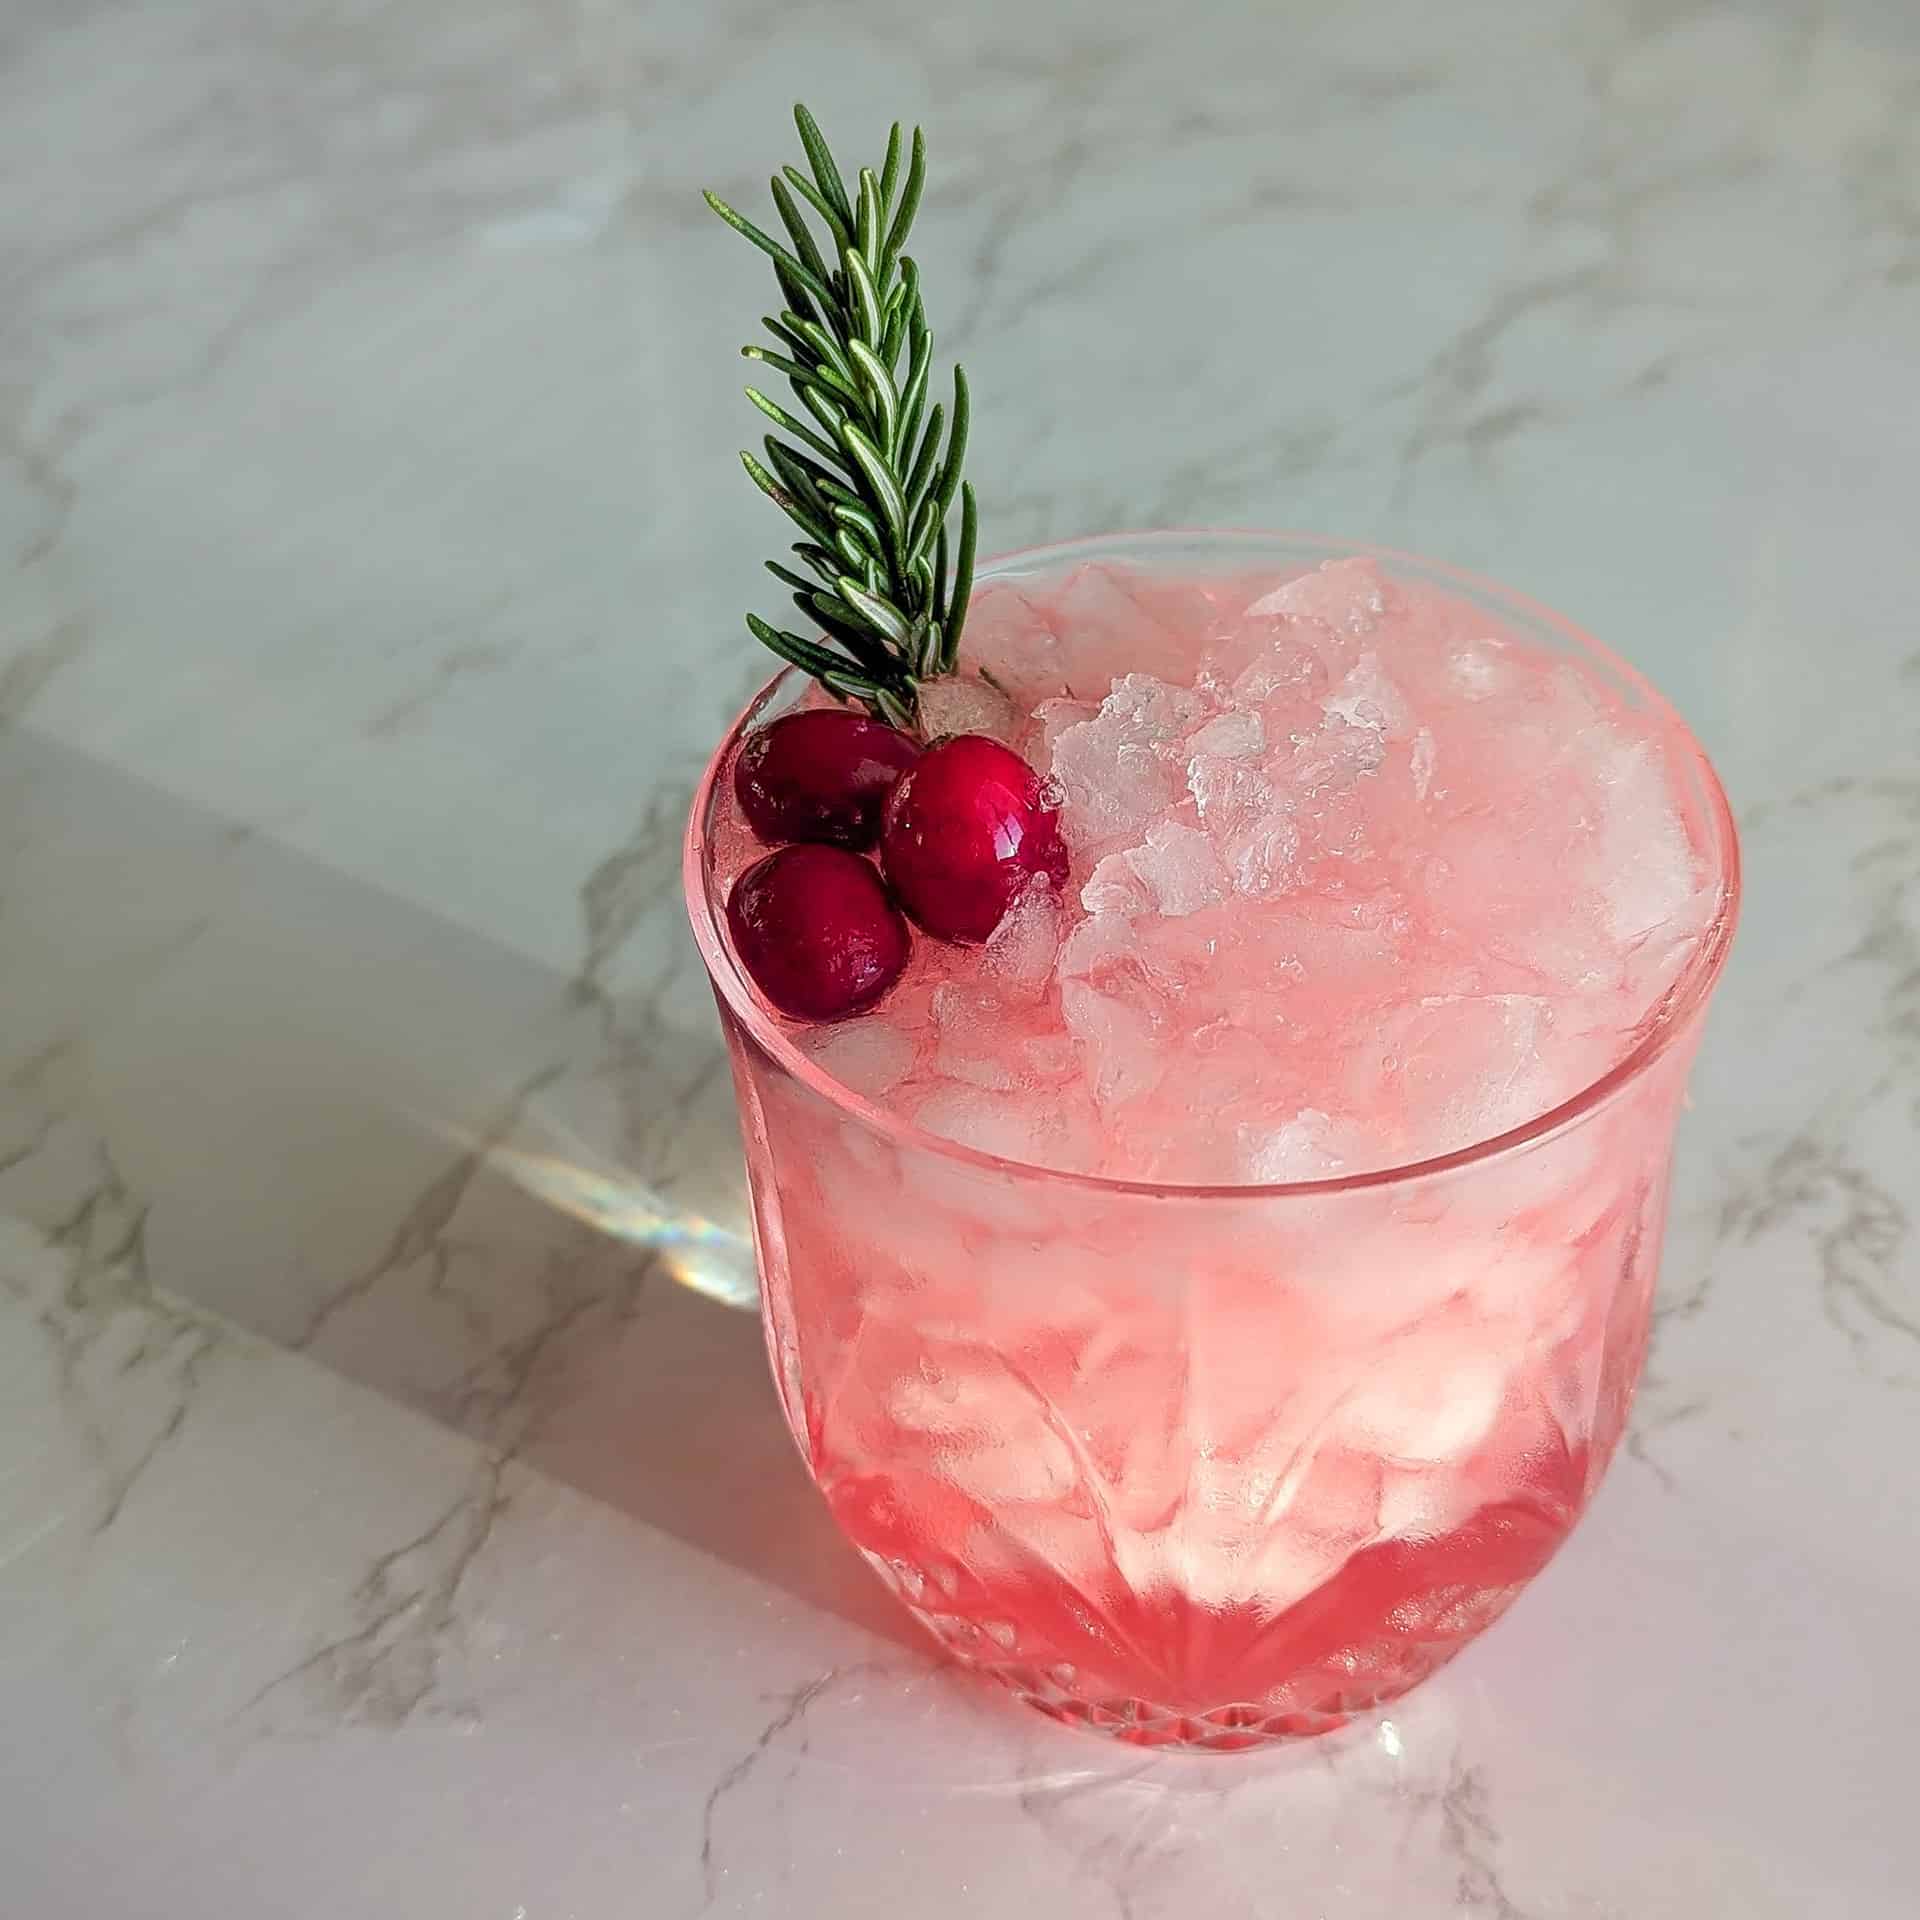 A Christmas cocktail made with vodka and cranberry juice in a crystal glass, garnished with a rosemary sprig and frozen cranberries